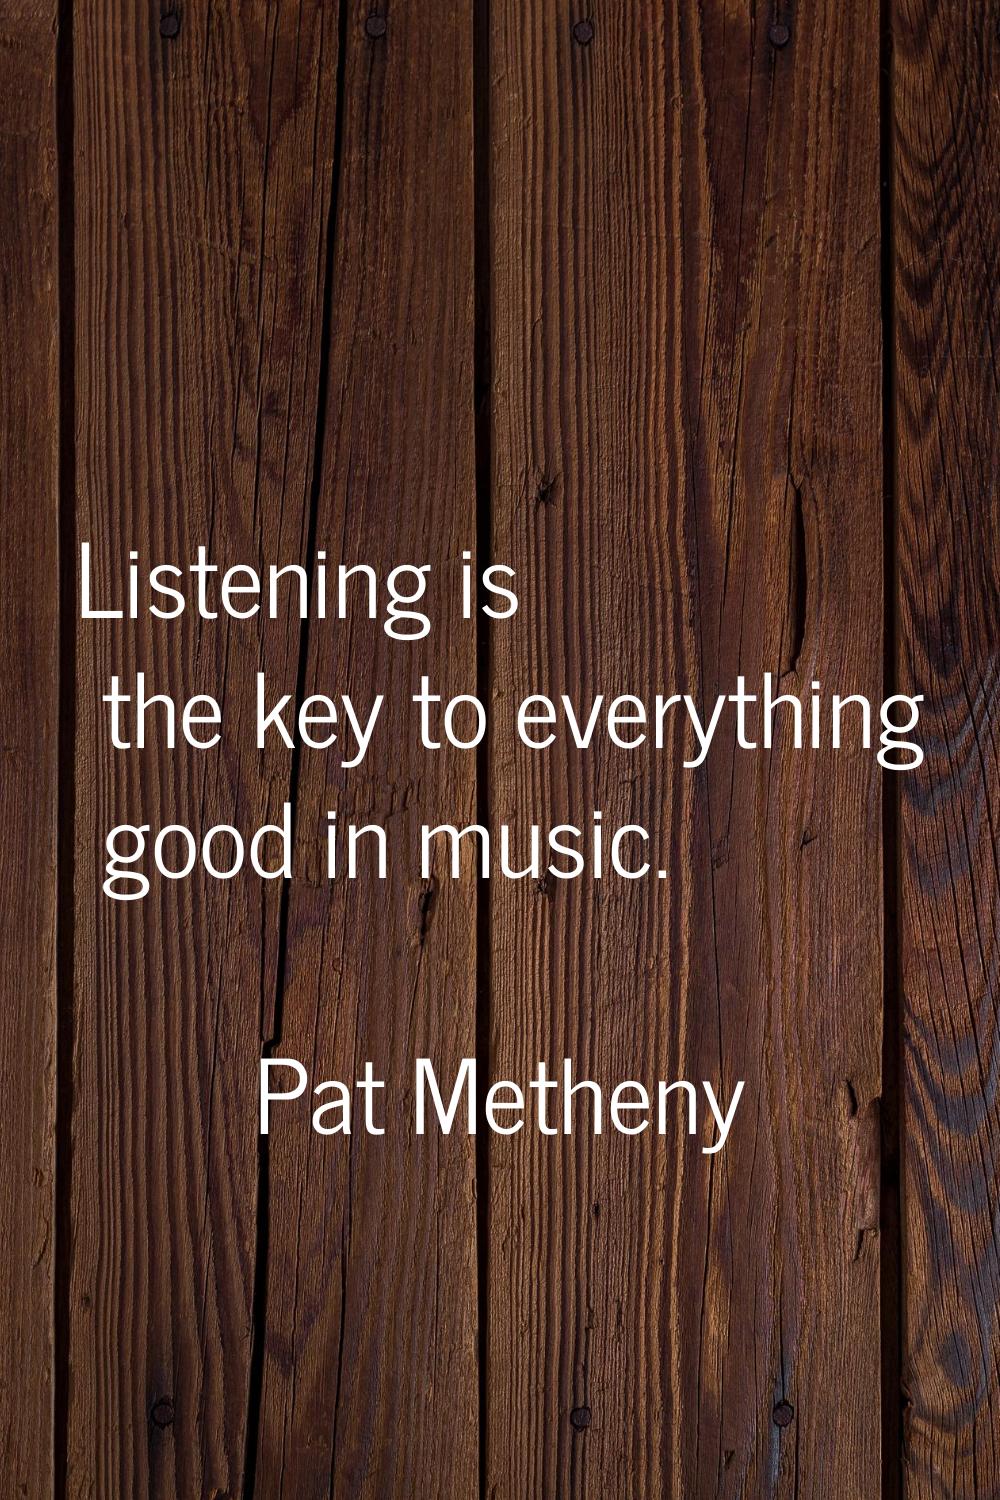 Listening is the key to everything good in music.